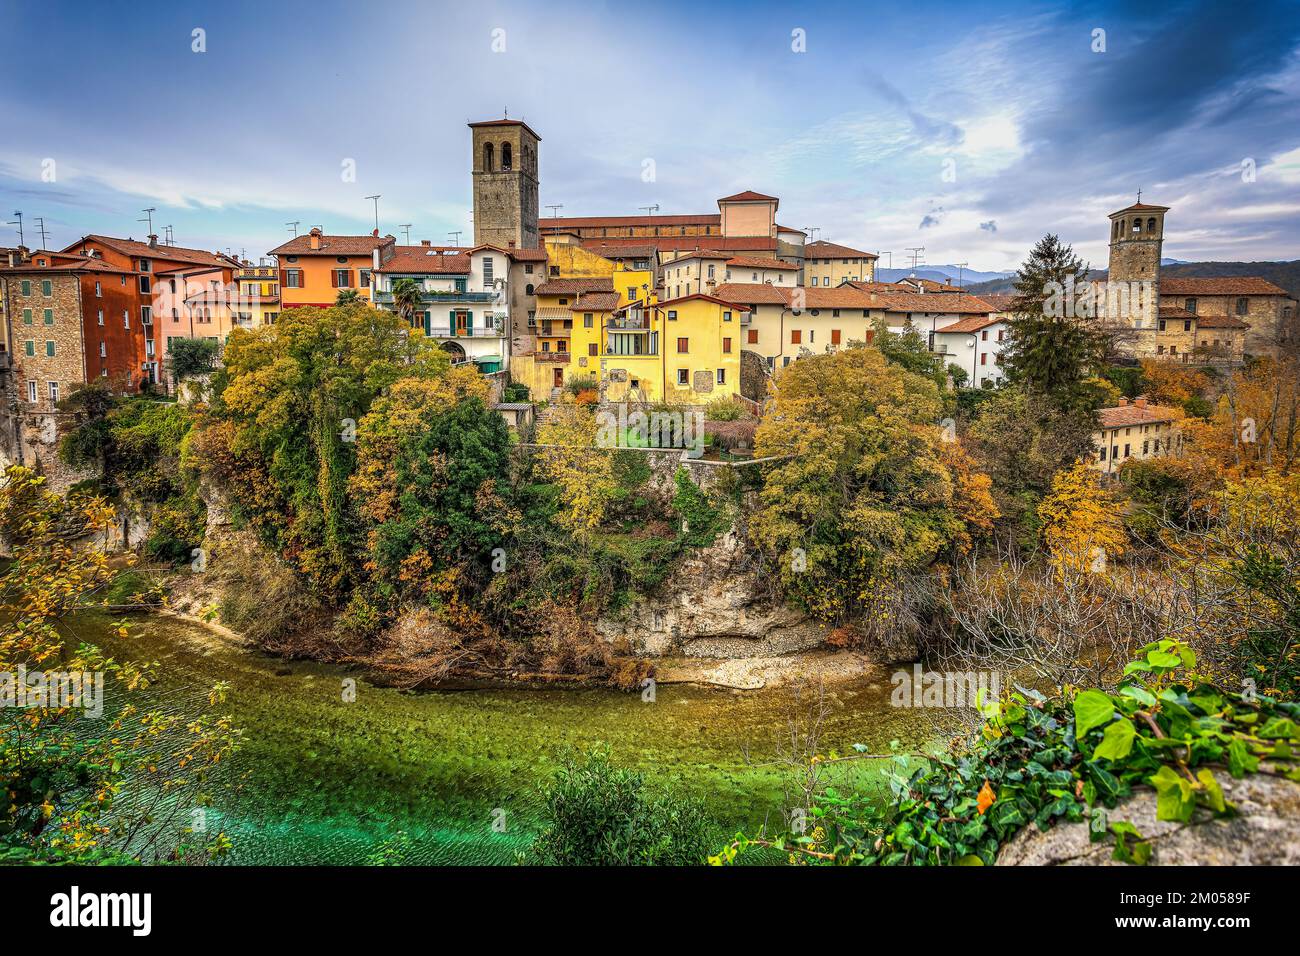 View of the Cividale del Friuli village and the Natisone River. Photo taken on 29th of November 2022 in the Cividale del Friuli village, Udine provinc Stock Photo